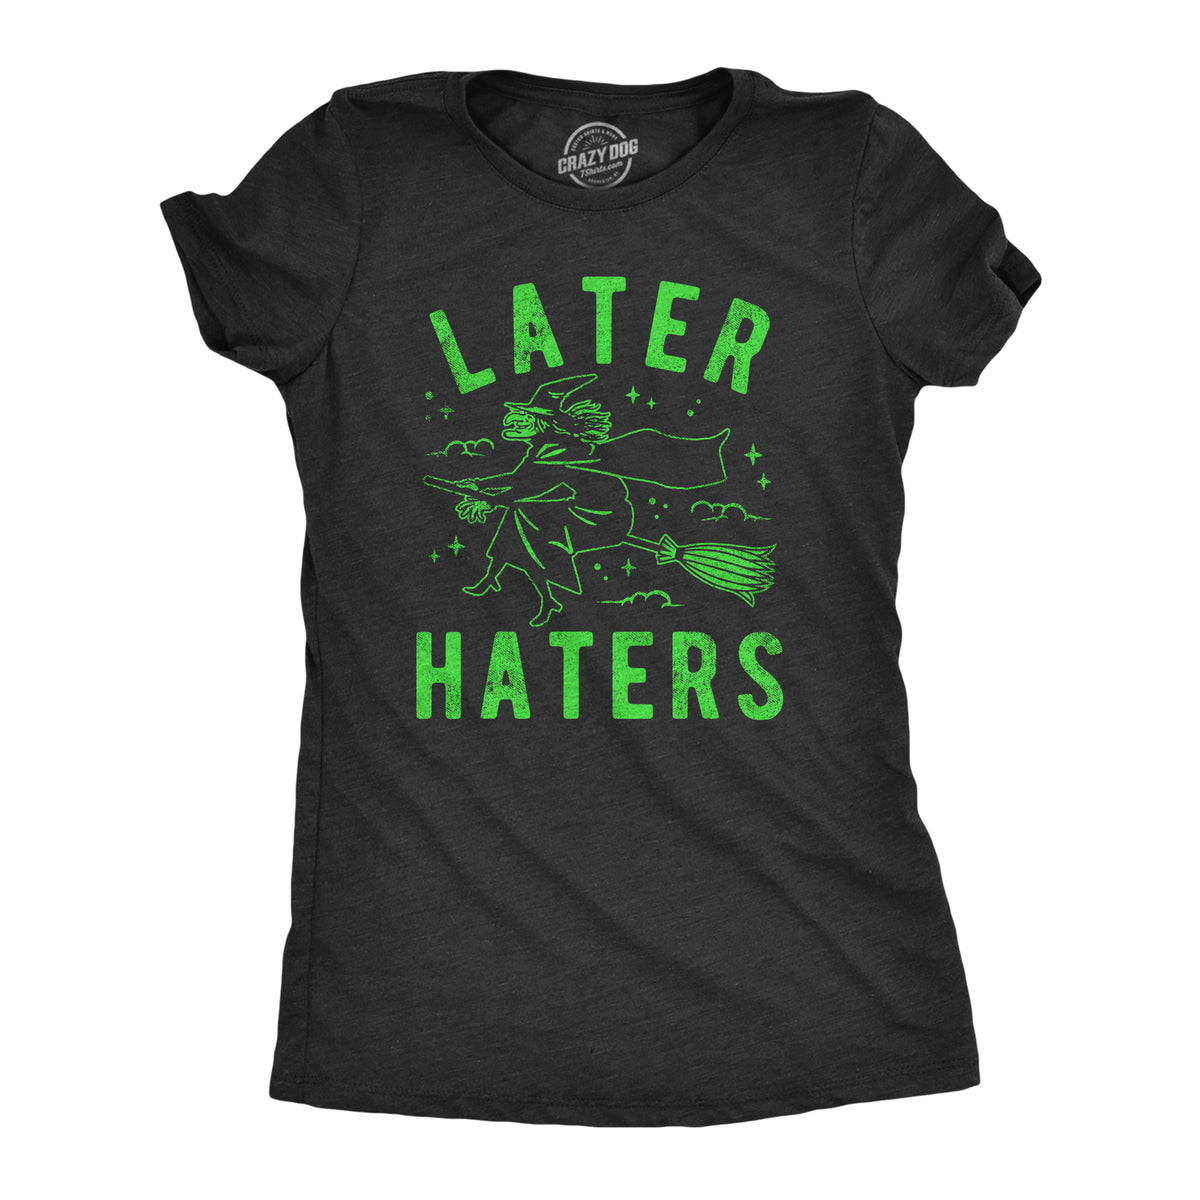 Funny Heather Black - HATERS Later Haters Womens T Shirt Nerdy Halloween Sarcastic Tee